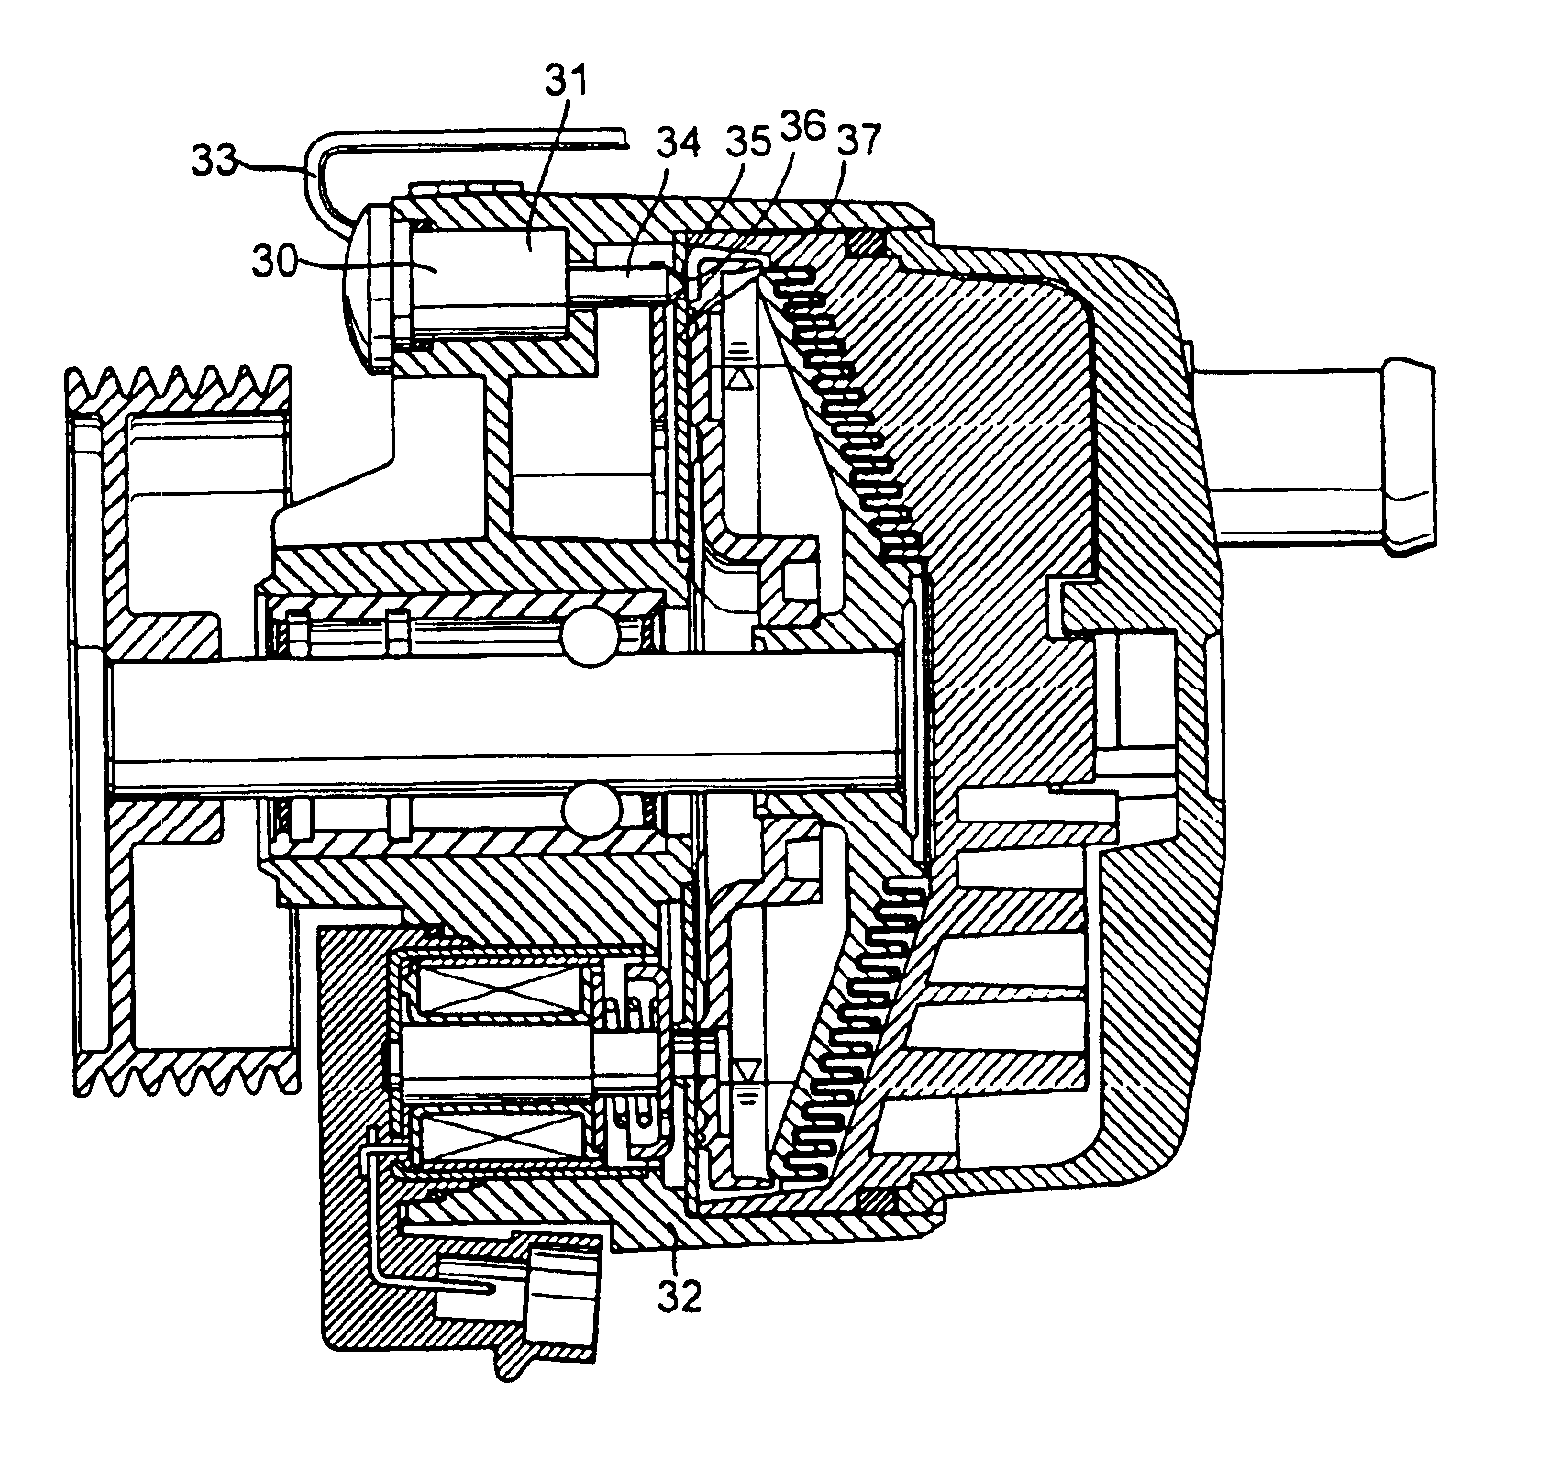 Heating device suitable for motor vehicles